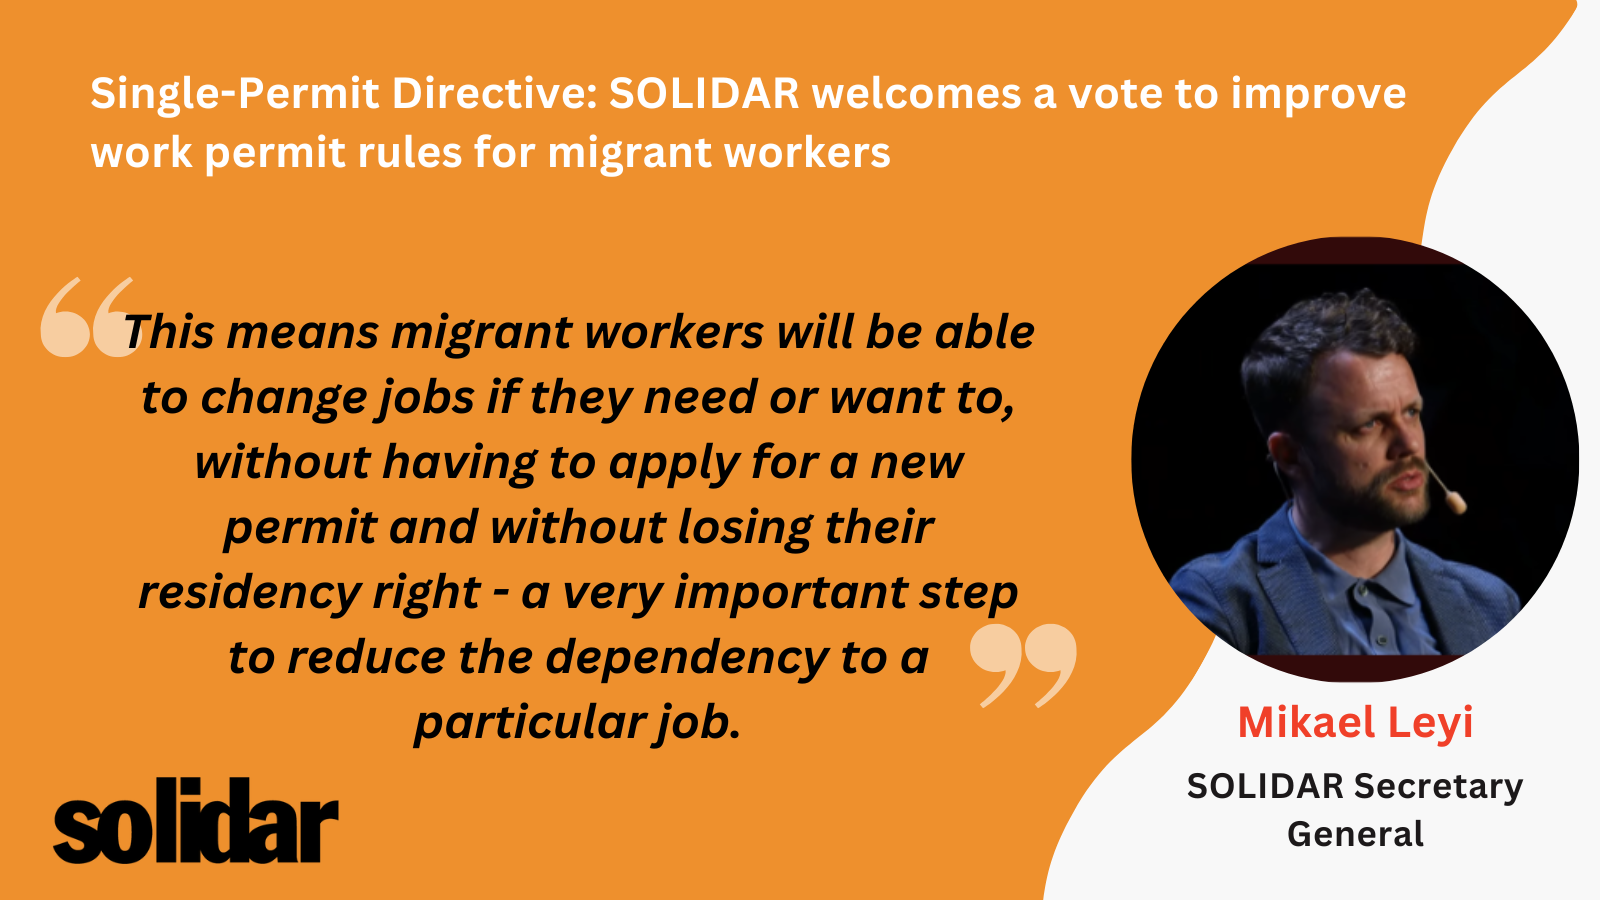 Single-Permit Directive: SOLIDAR welcomes a vote to improve work permit rules for migrant workers